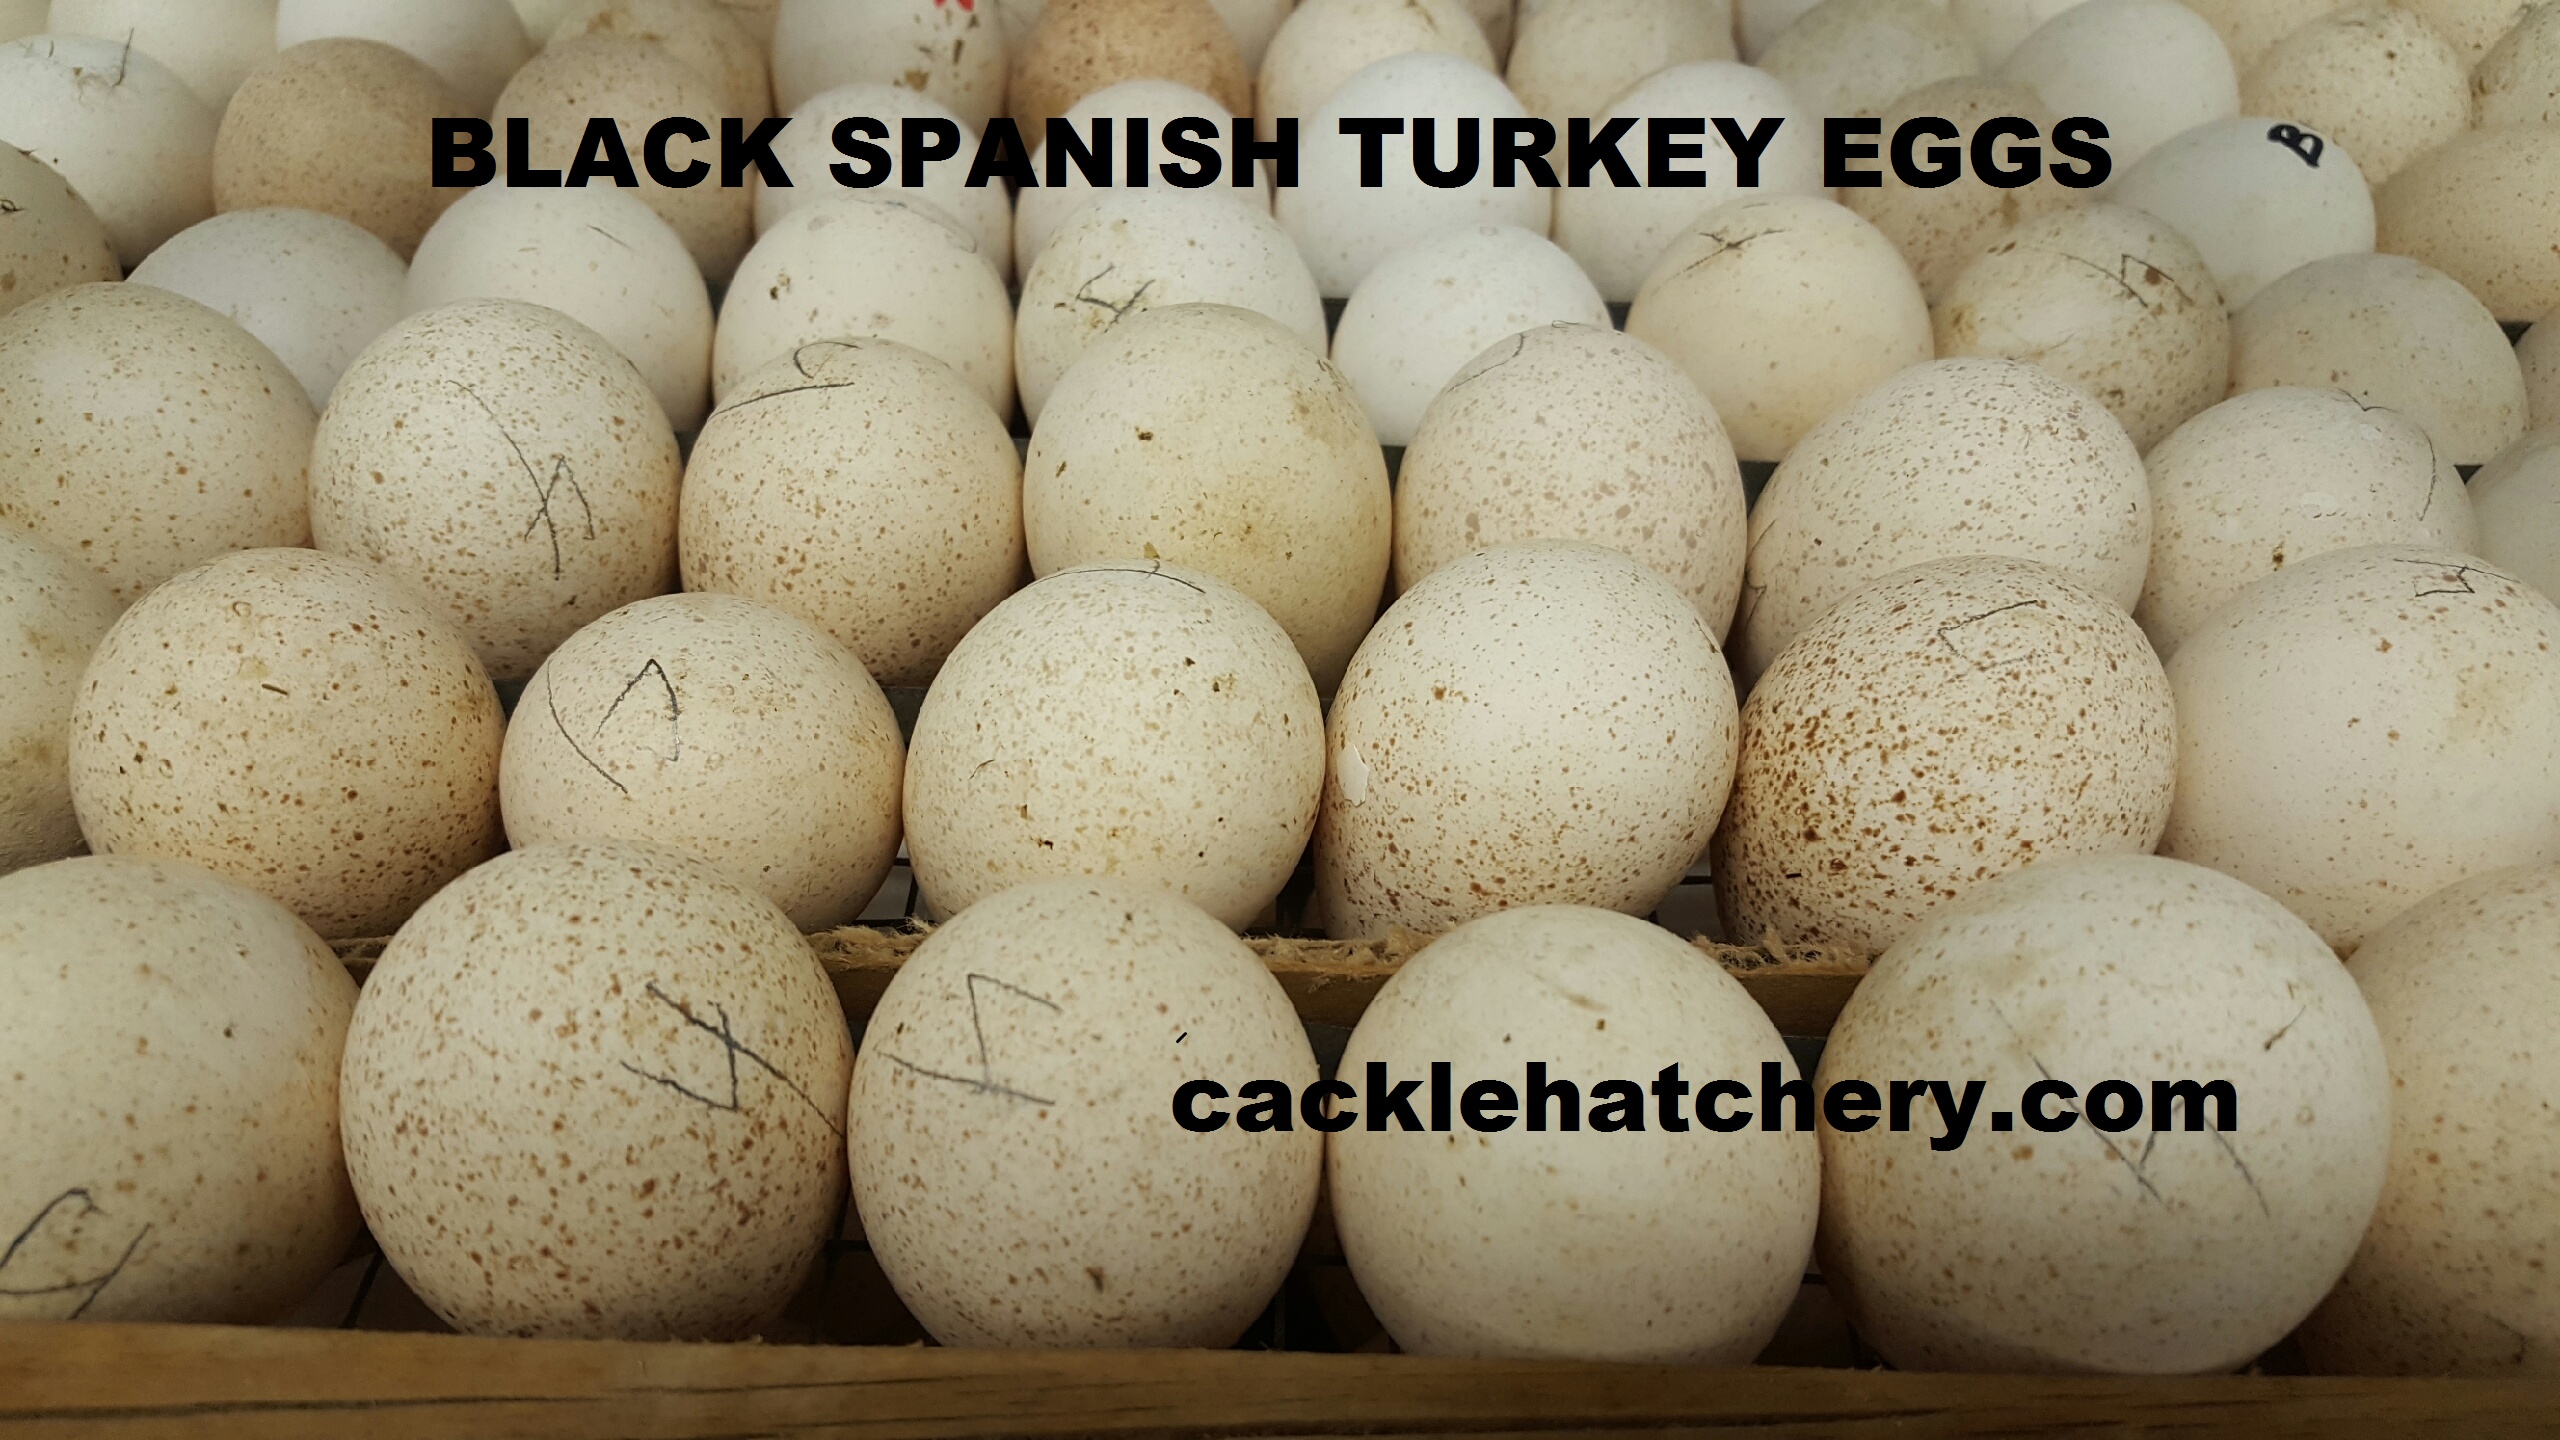 What color are turkey eggs?